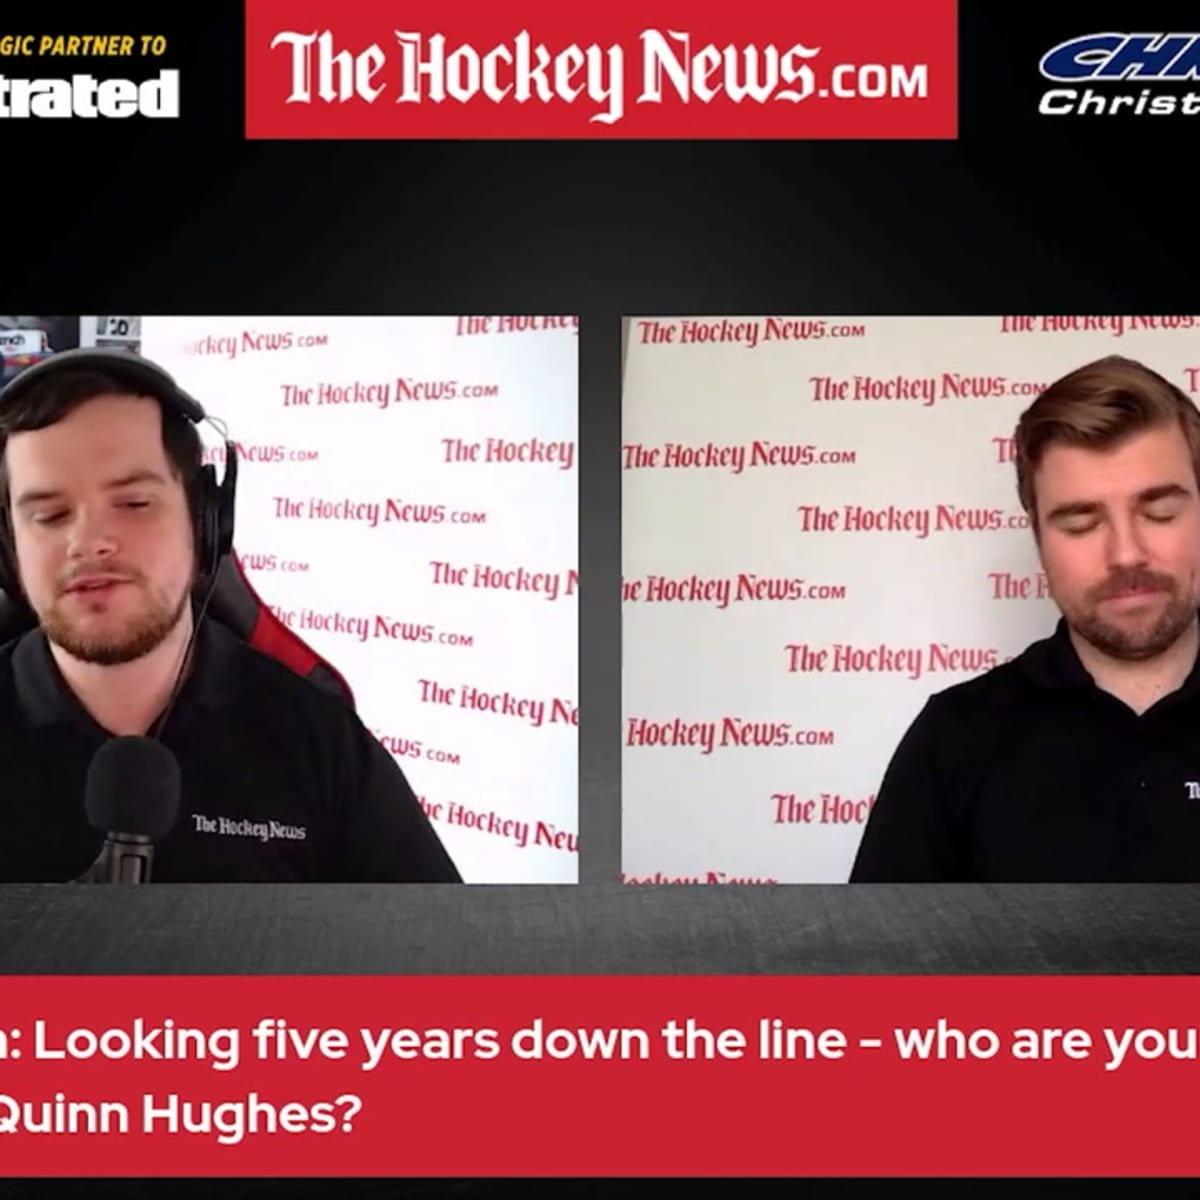 Who Would You Rather Have: Cale Makar or Quinn Hughes? - The Hockey News